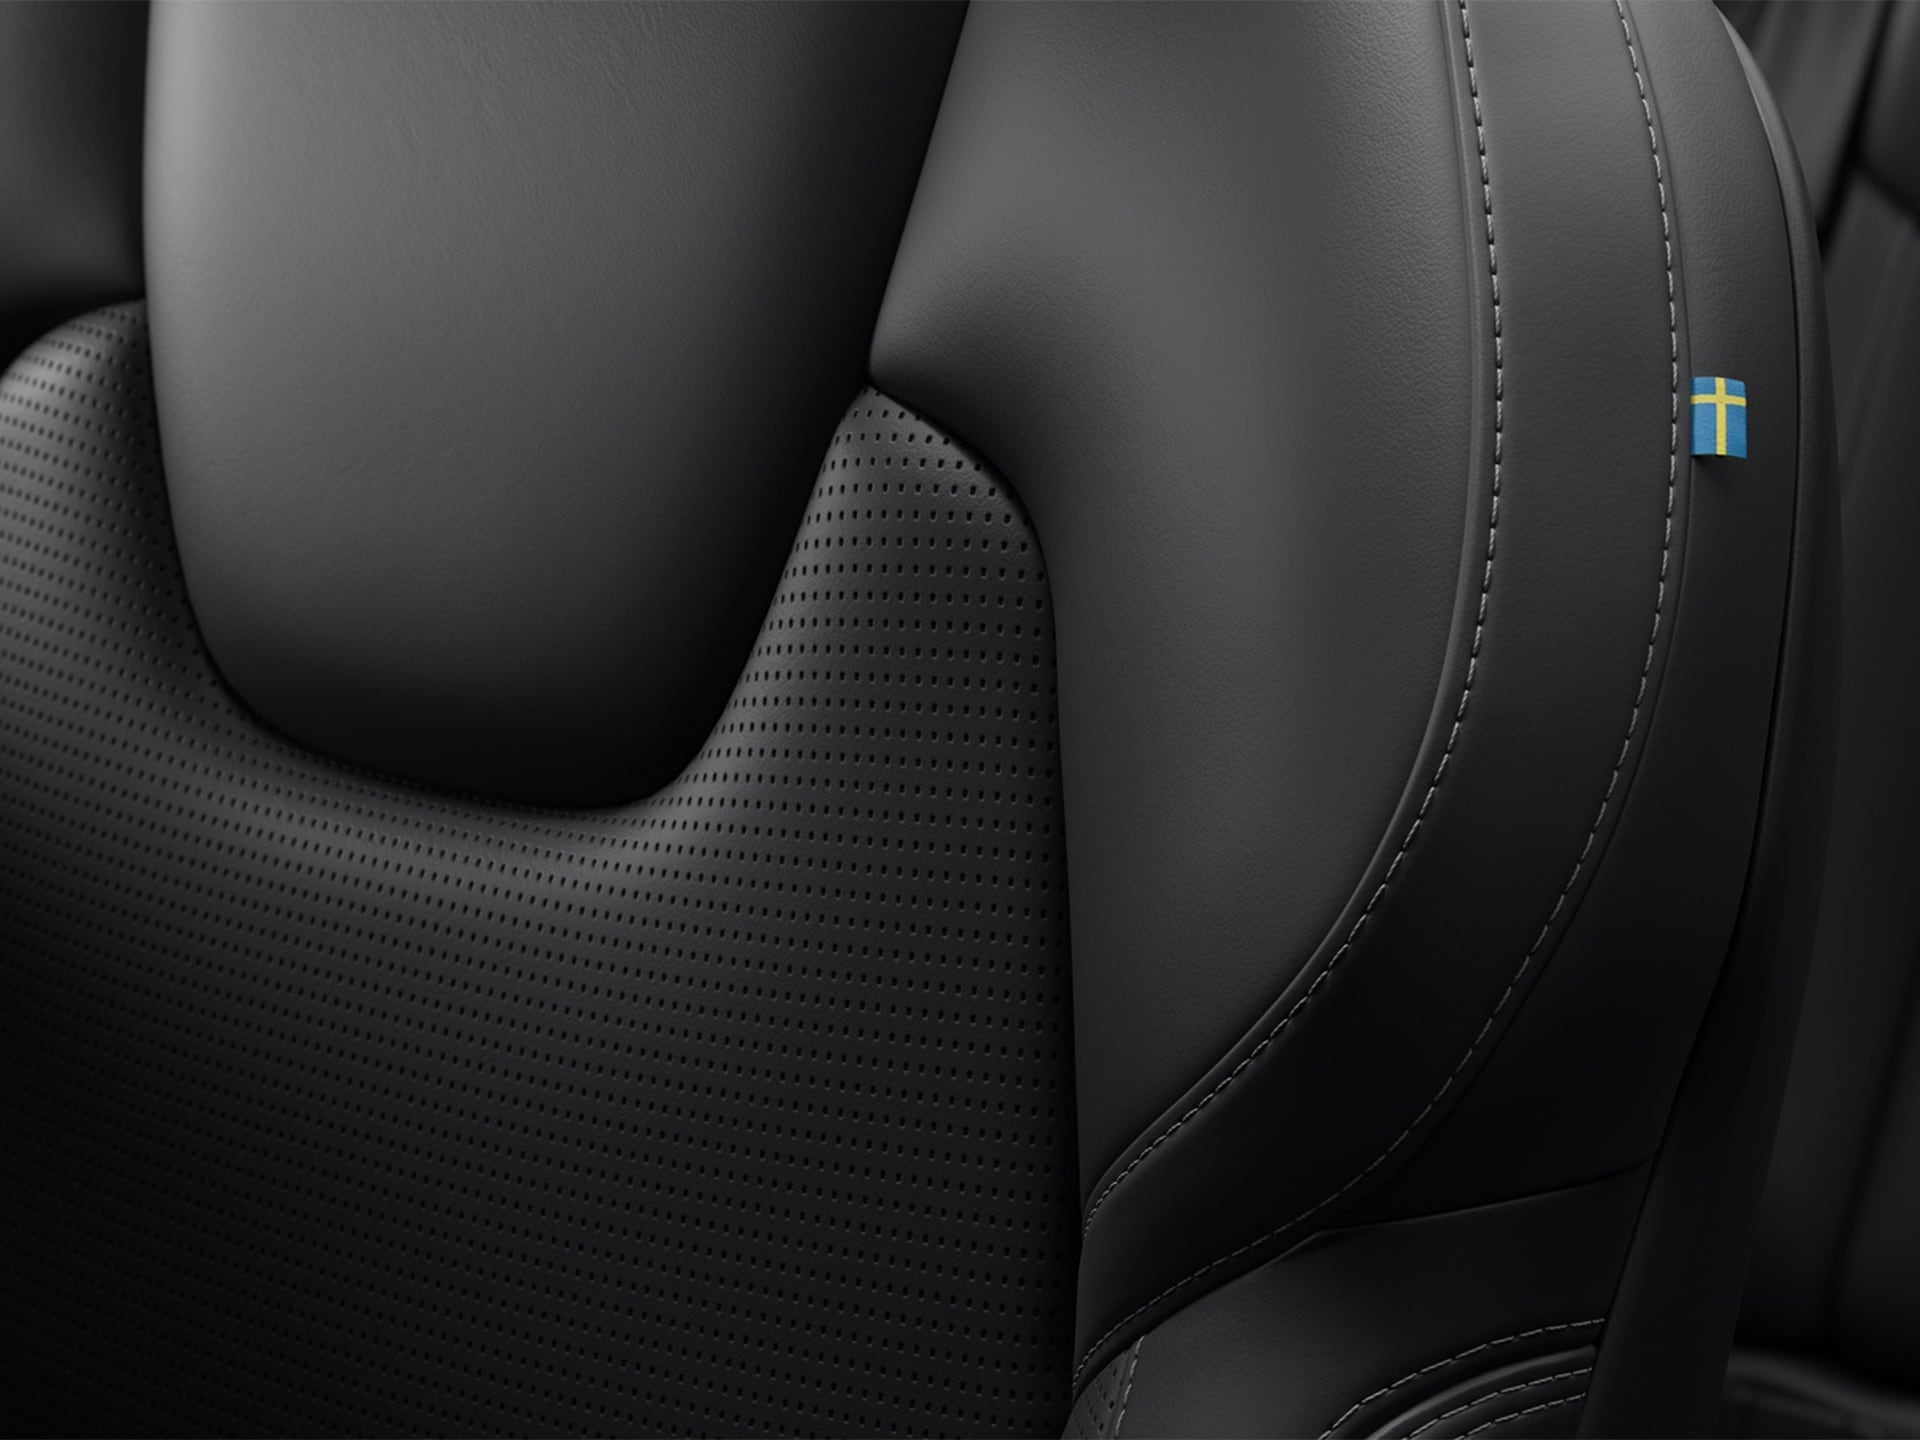 Nappa leather front seats in a Volvo S60 sedan.